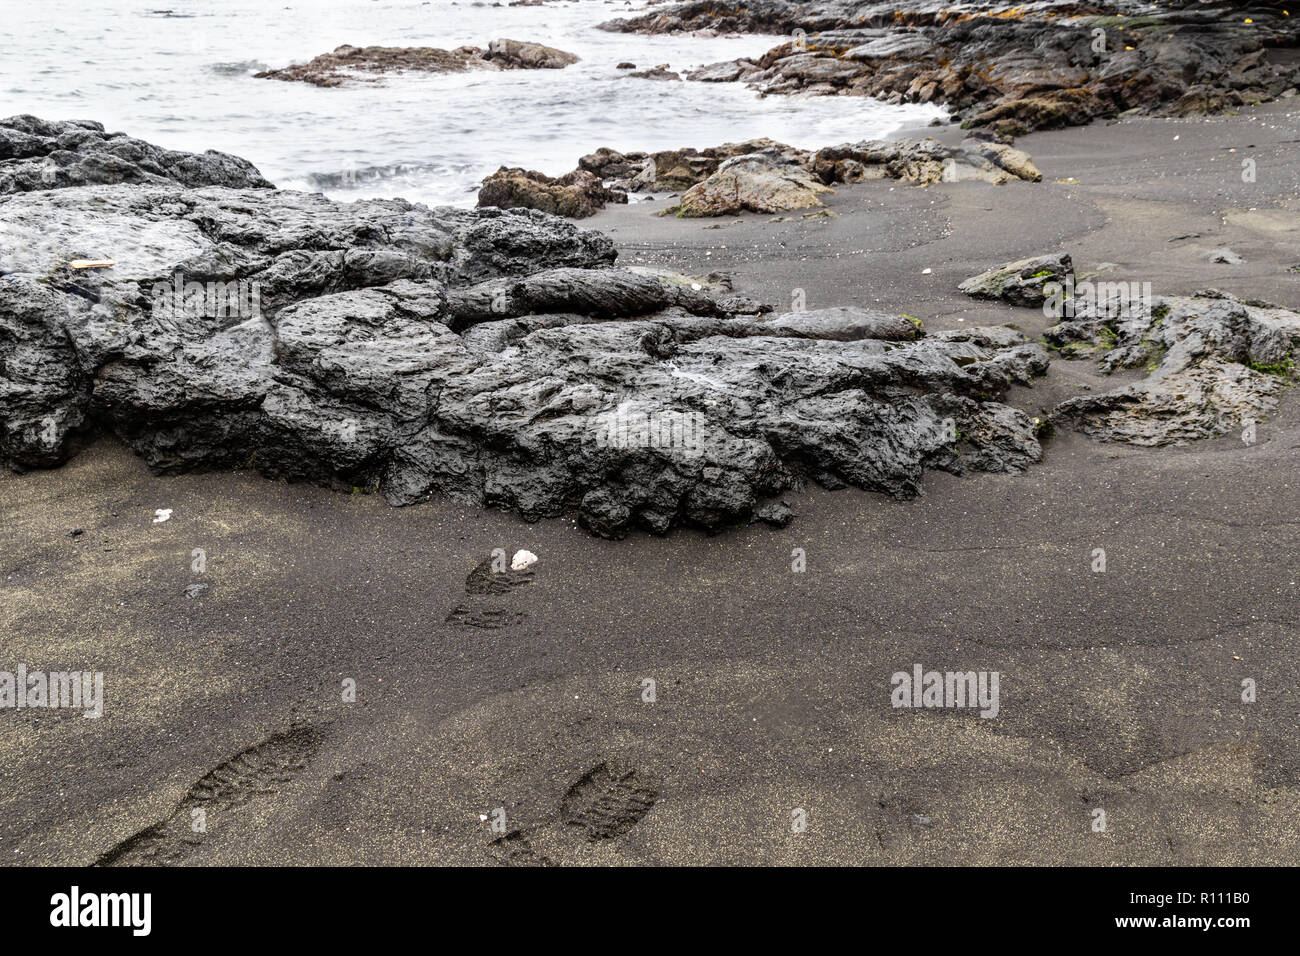 Volcanic rock on shore at green sand beach near Hilo, hawaii. Boot prints in sand, additional rocks and sea is in the background. Stock Photo